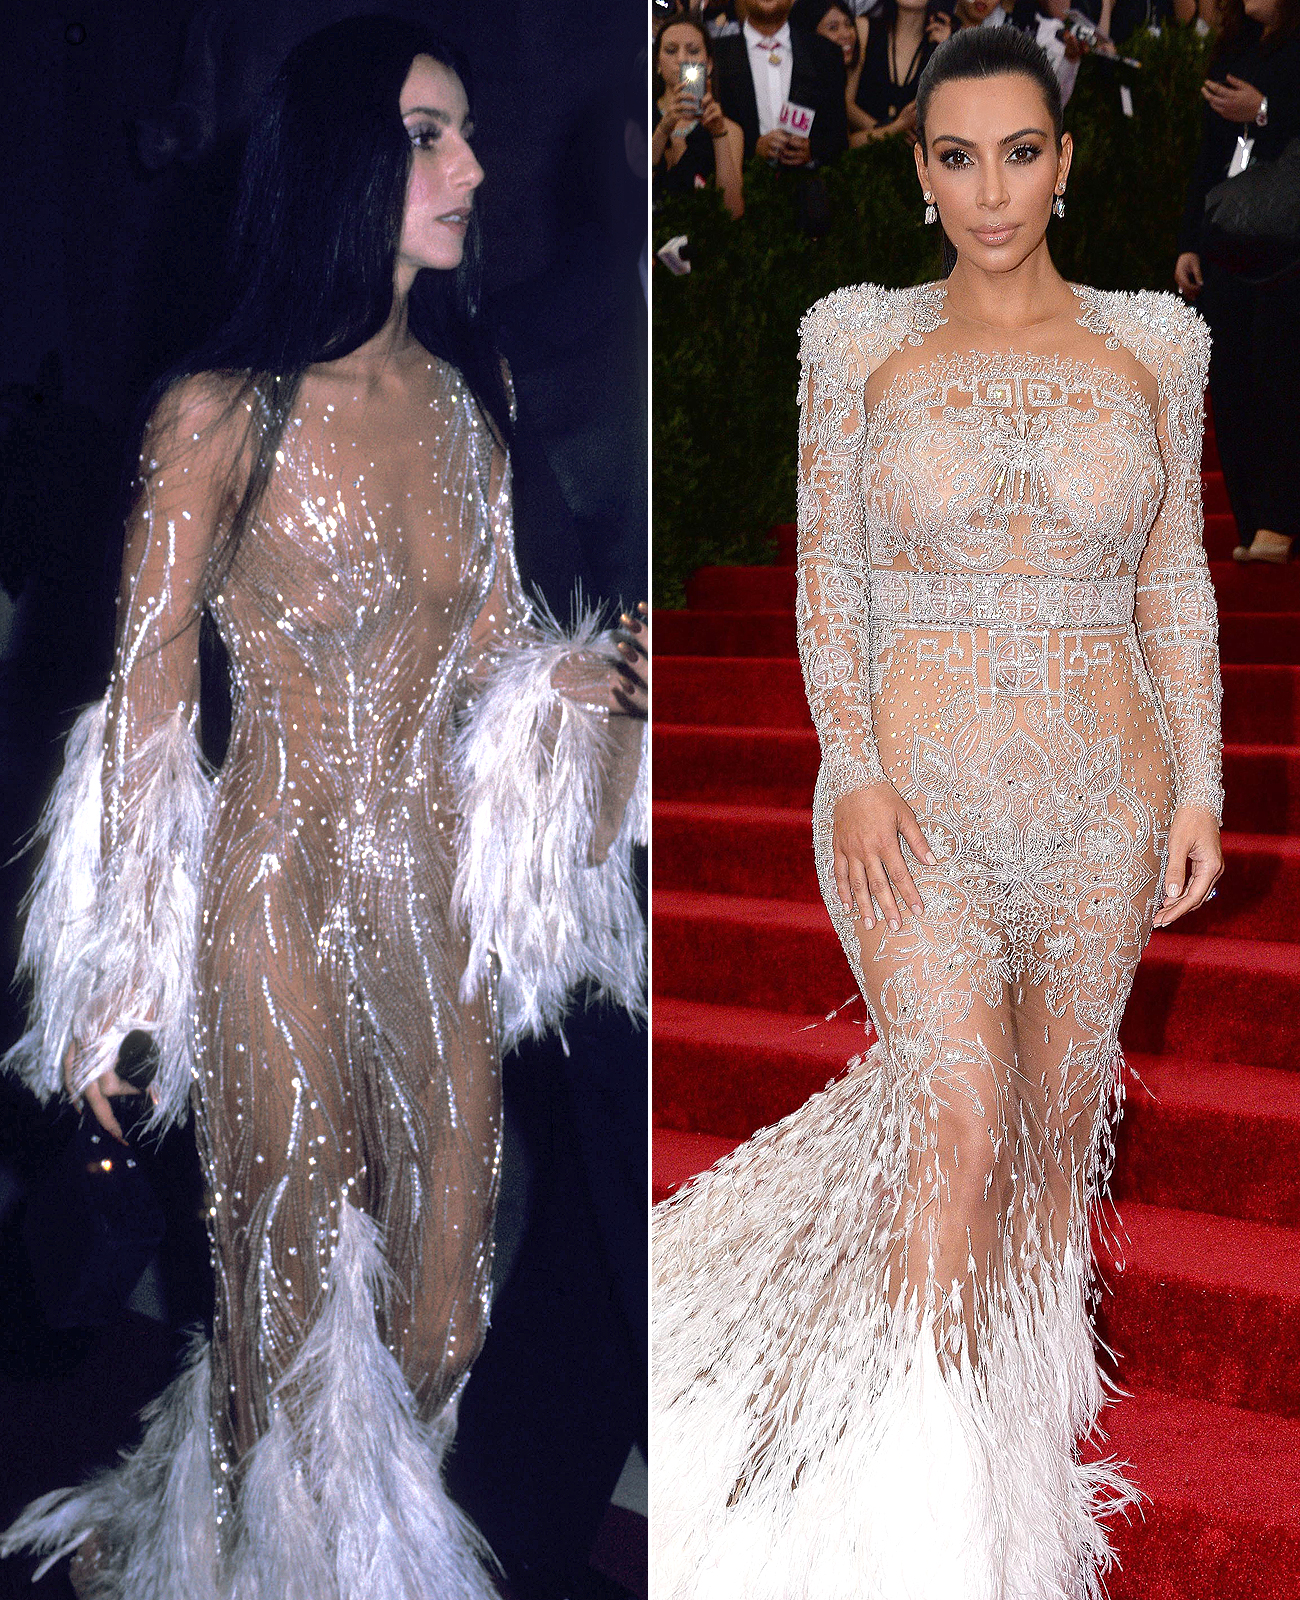 Times When Other Celebs Copied Cher's Outfits 1